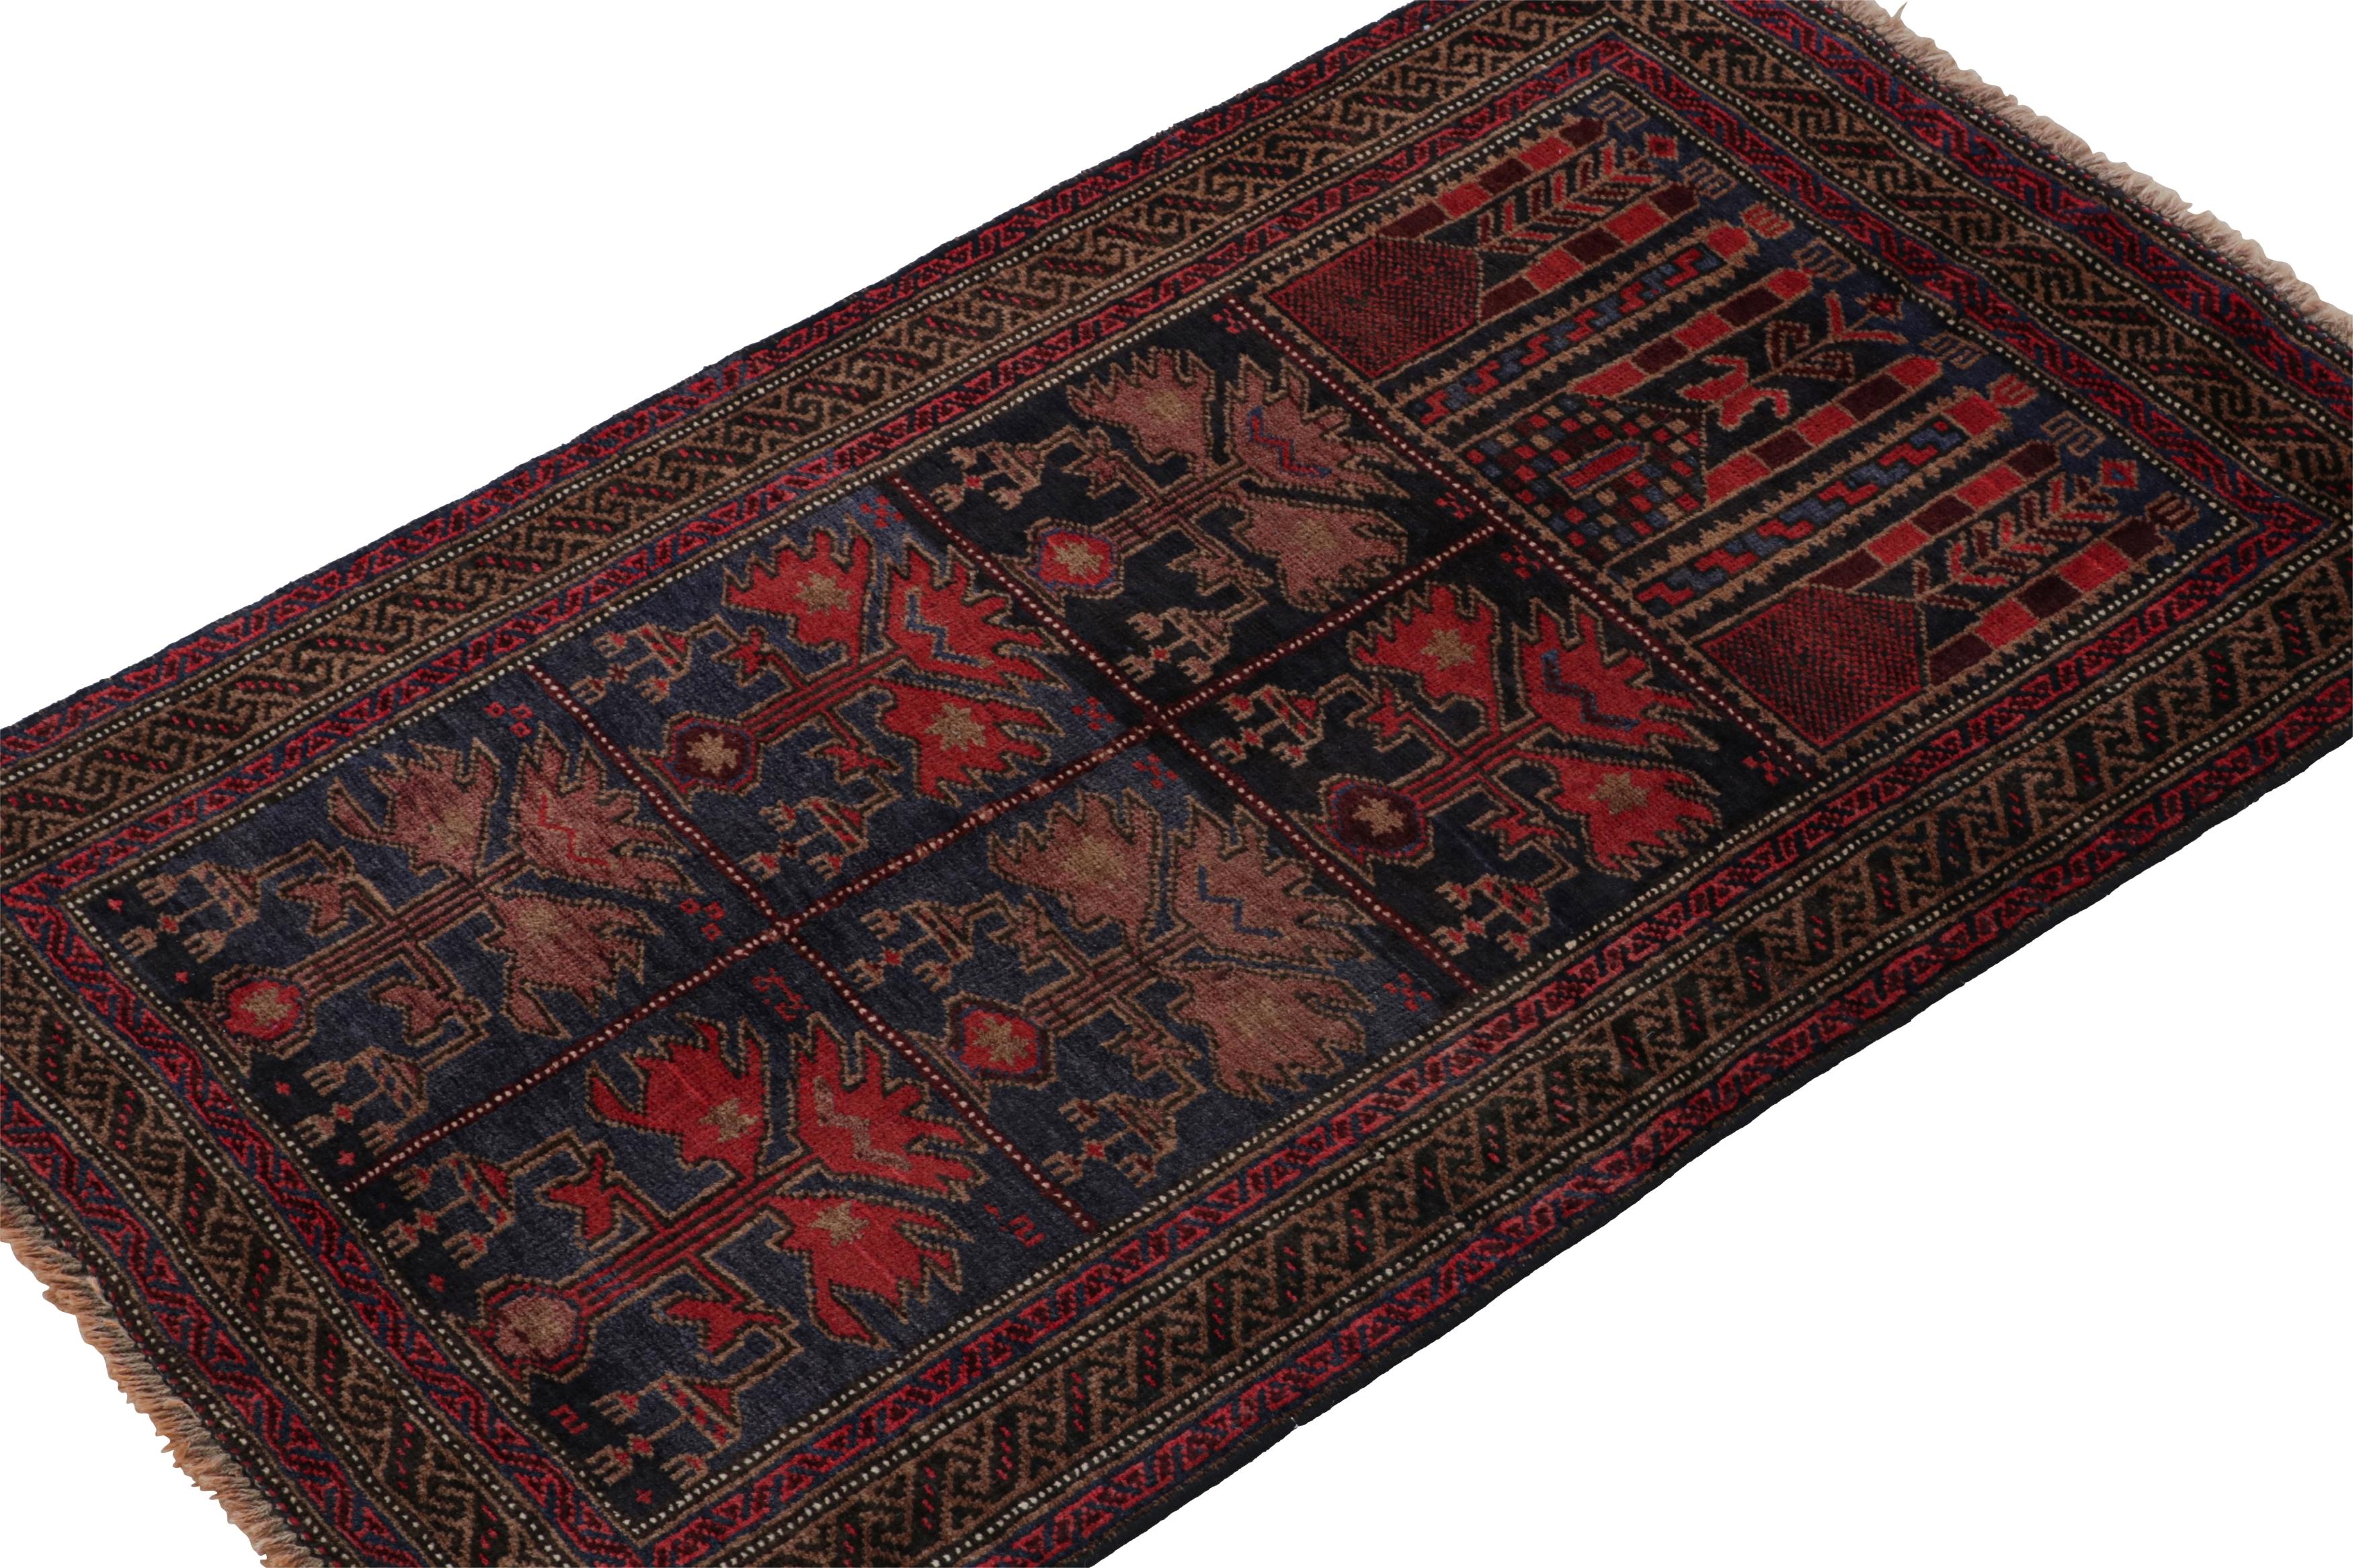 Hand-knotted in wool, this 3x4 Baluch Persian rug of the 1950s is the latest to enter Rug & Kilim’s Antique & Vintage collection.

On the Design:

The piece carries tribal patterns in prevailing tones of red & blue. Connoisseurs will admire the